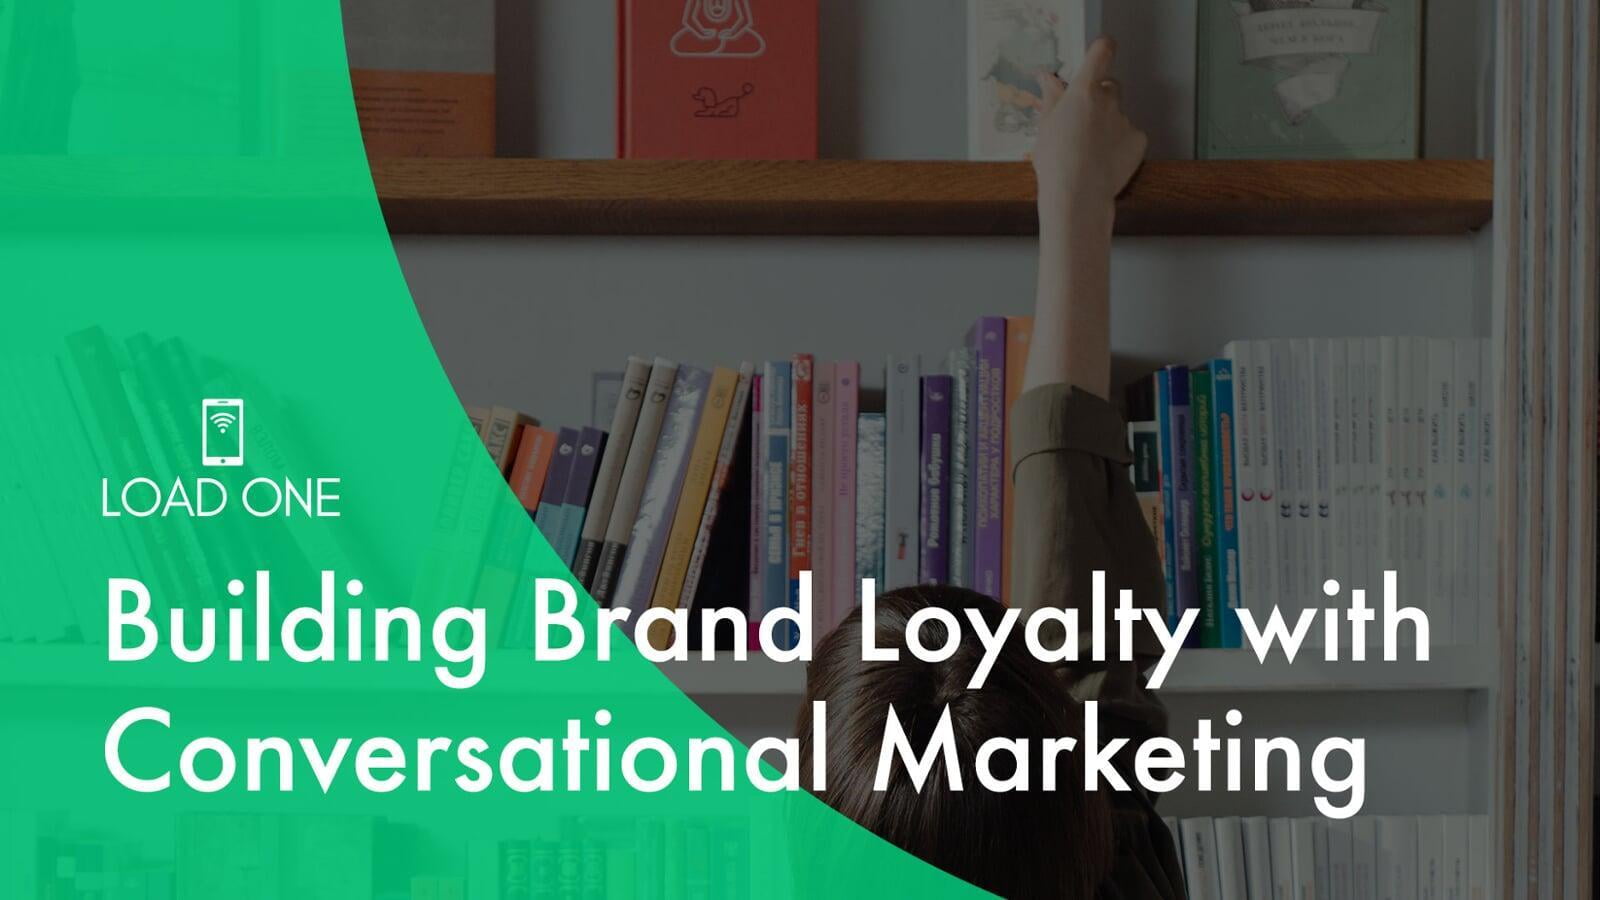 Building Brand Loyalty with Conversational Marketing